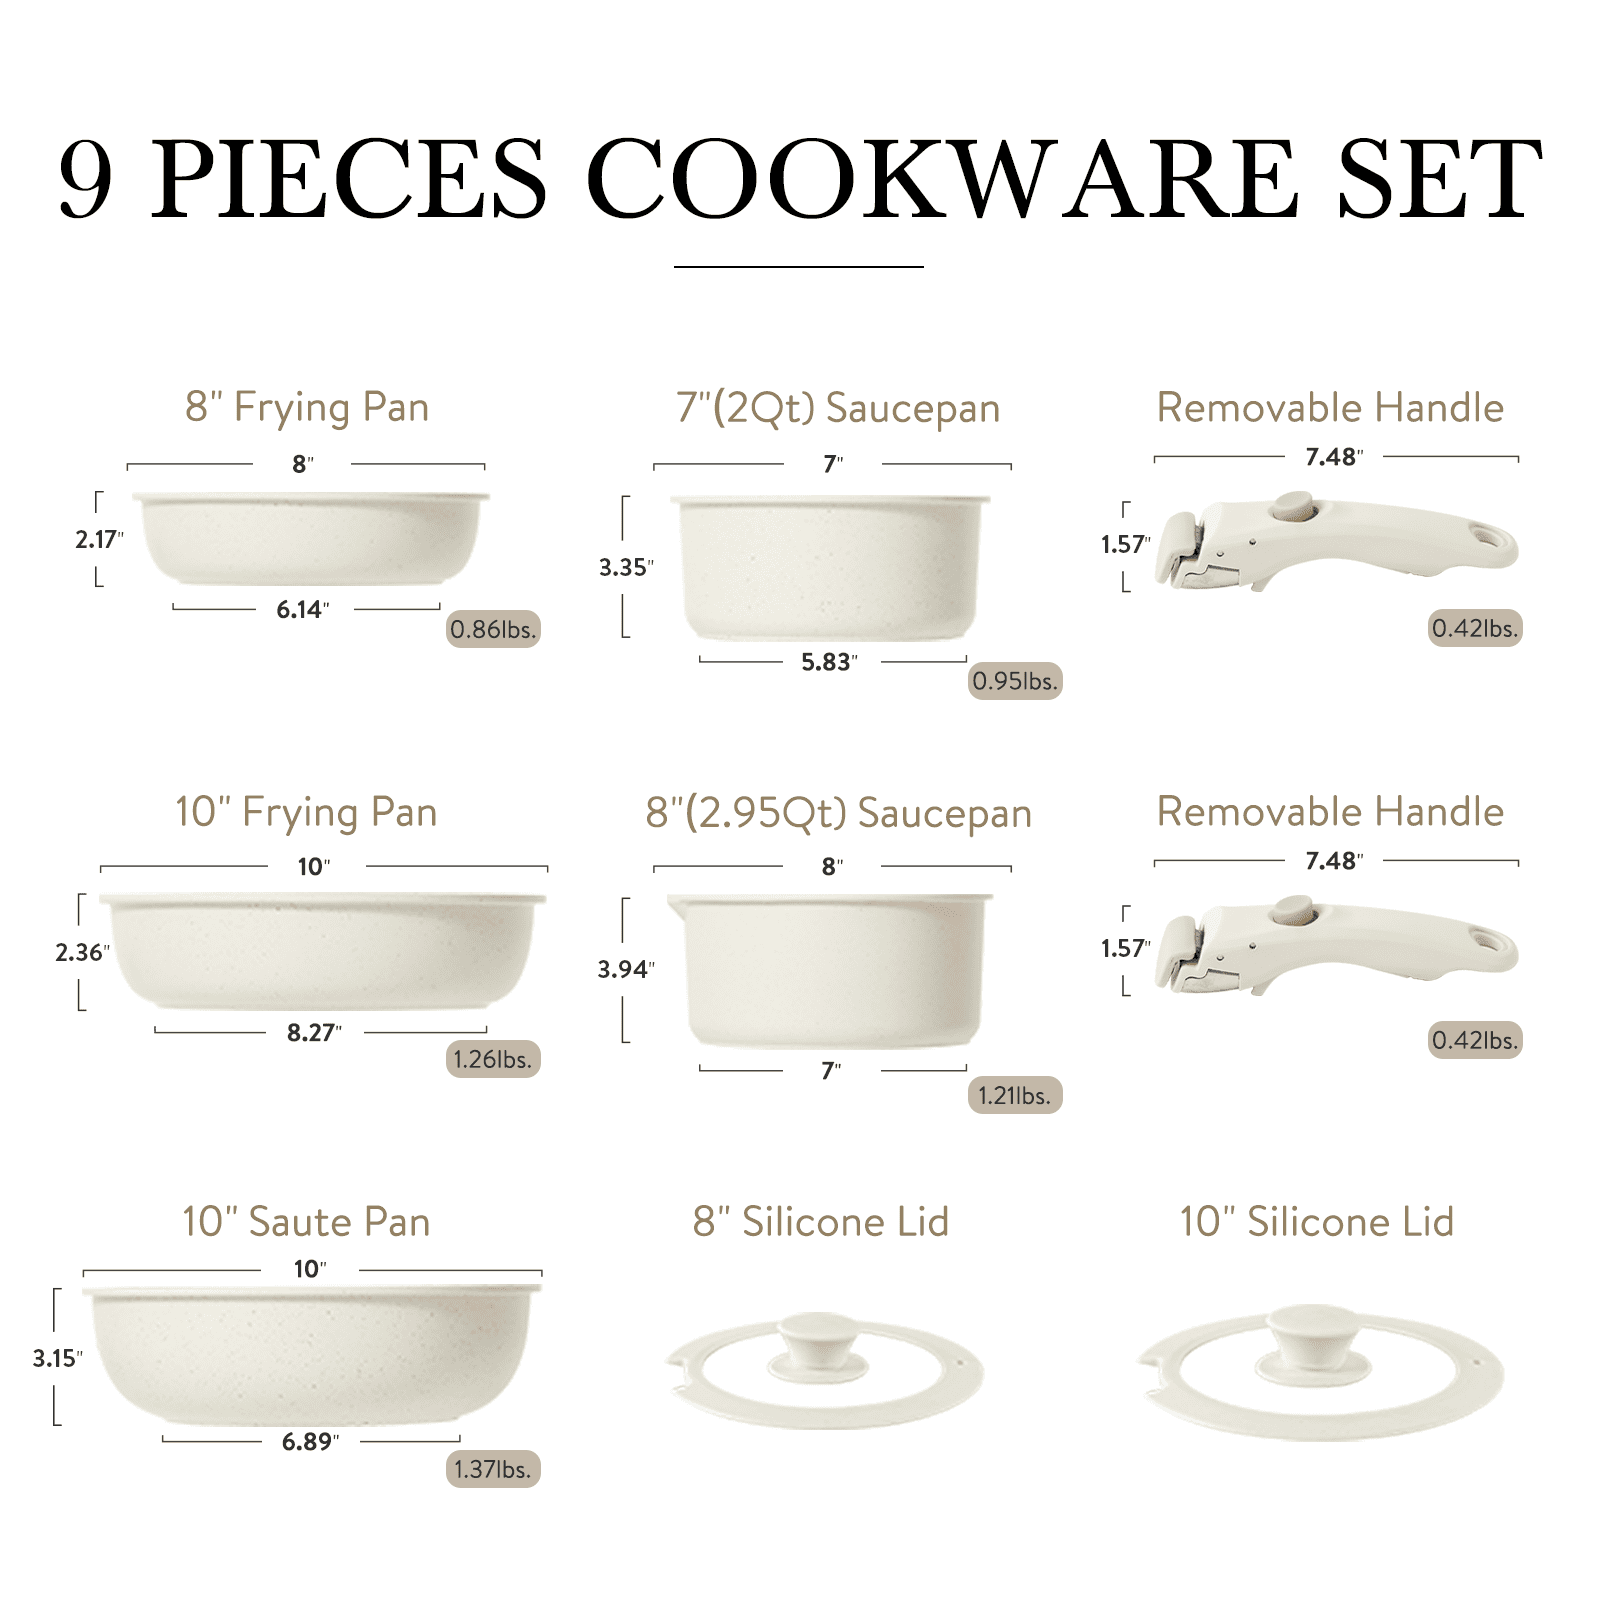 Carote Nonstick Cookware Set with Detachable Handle $29.99 (Retail $99.99)